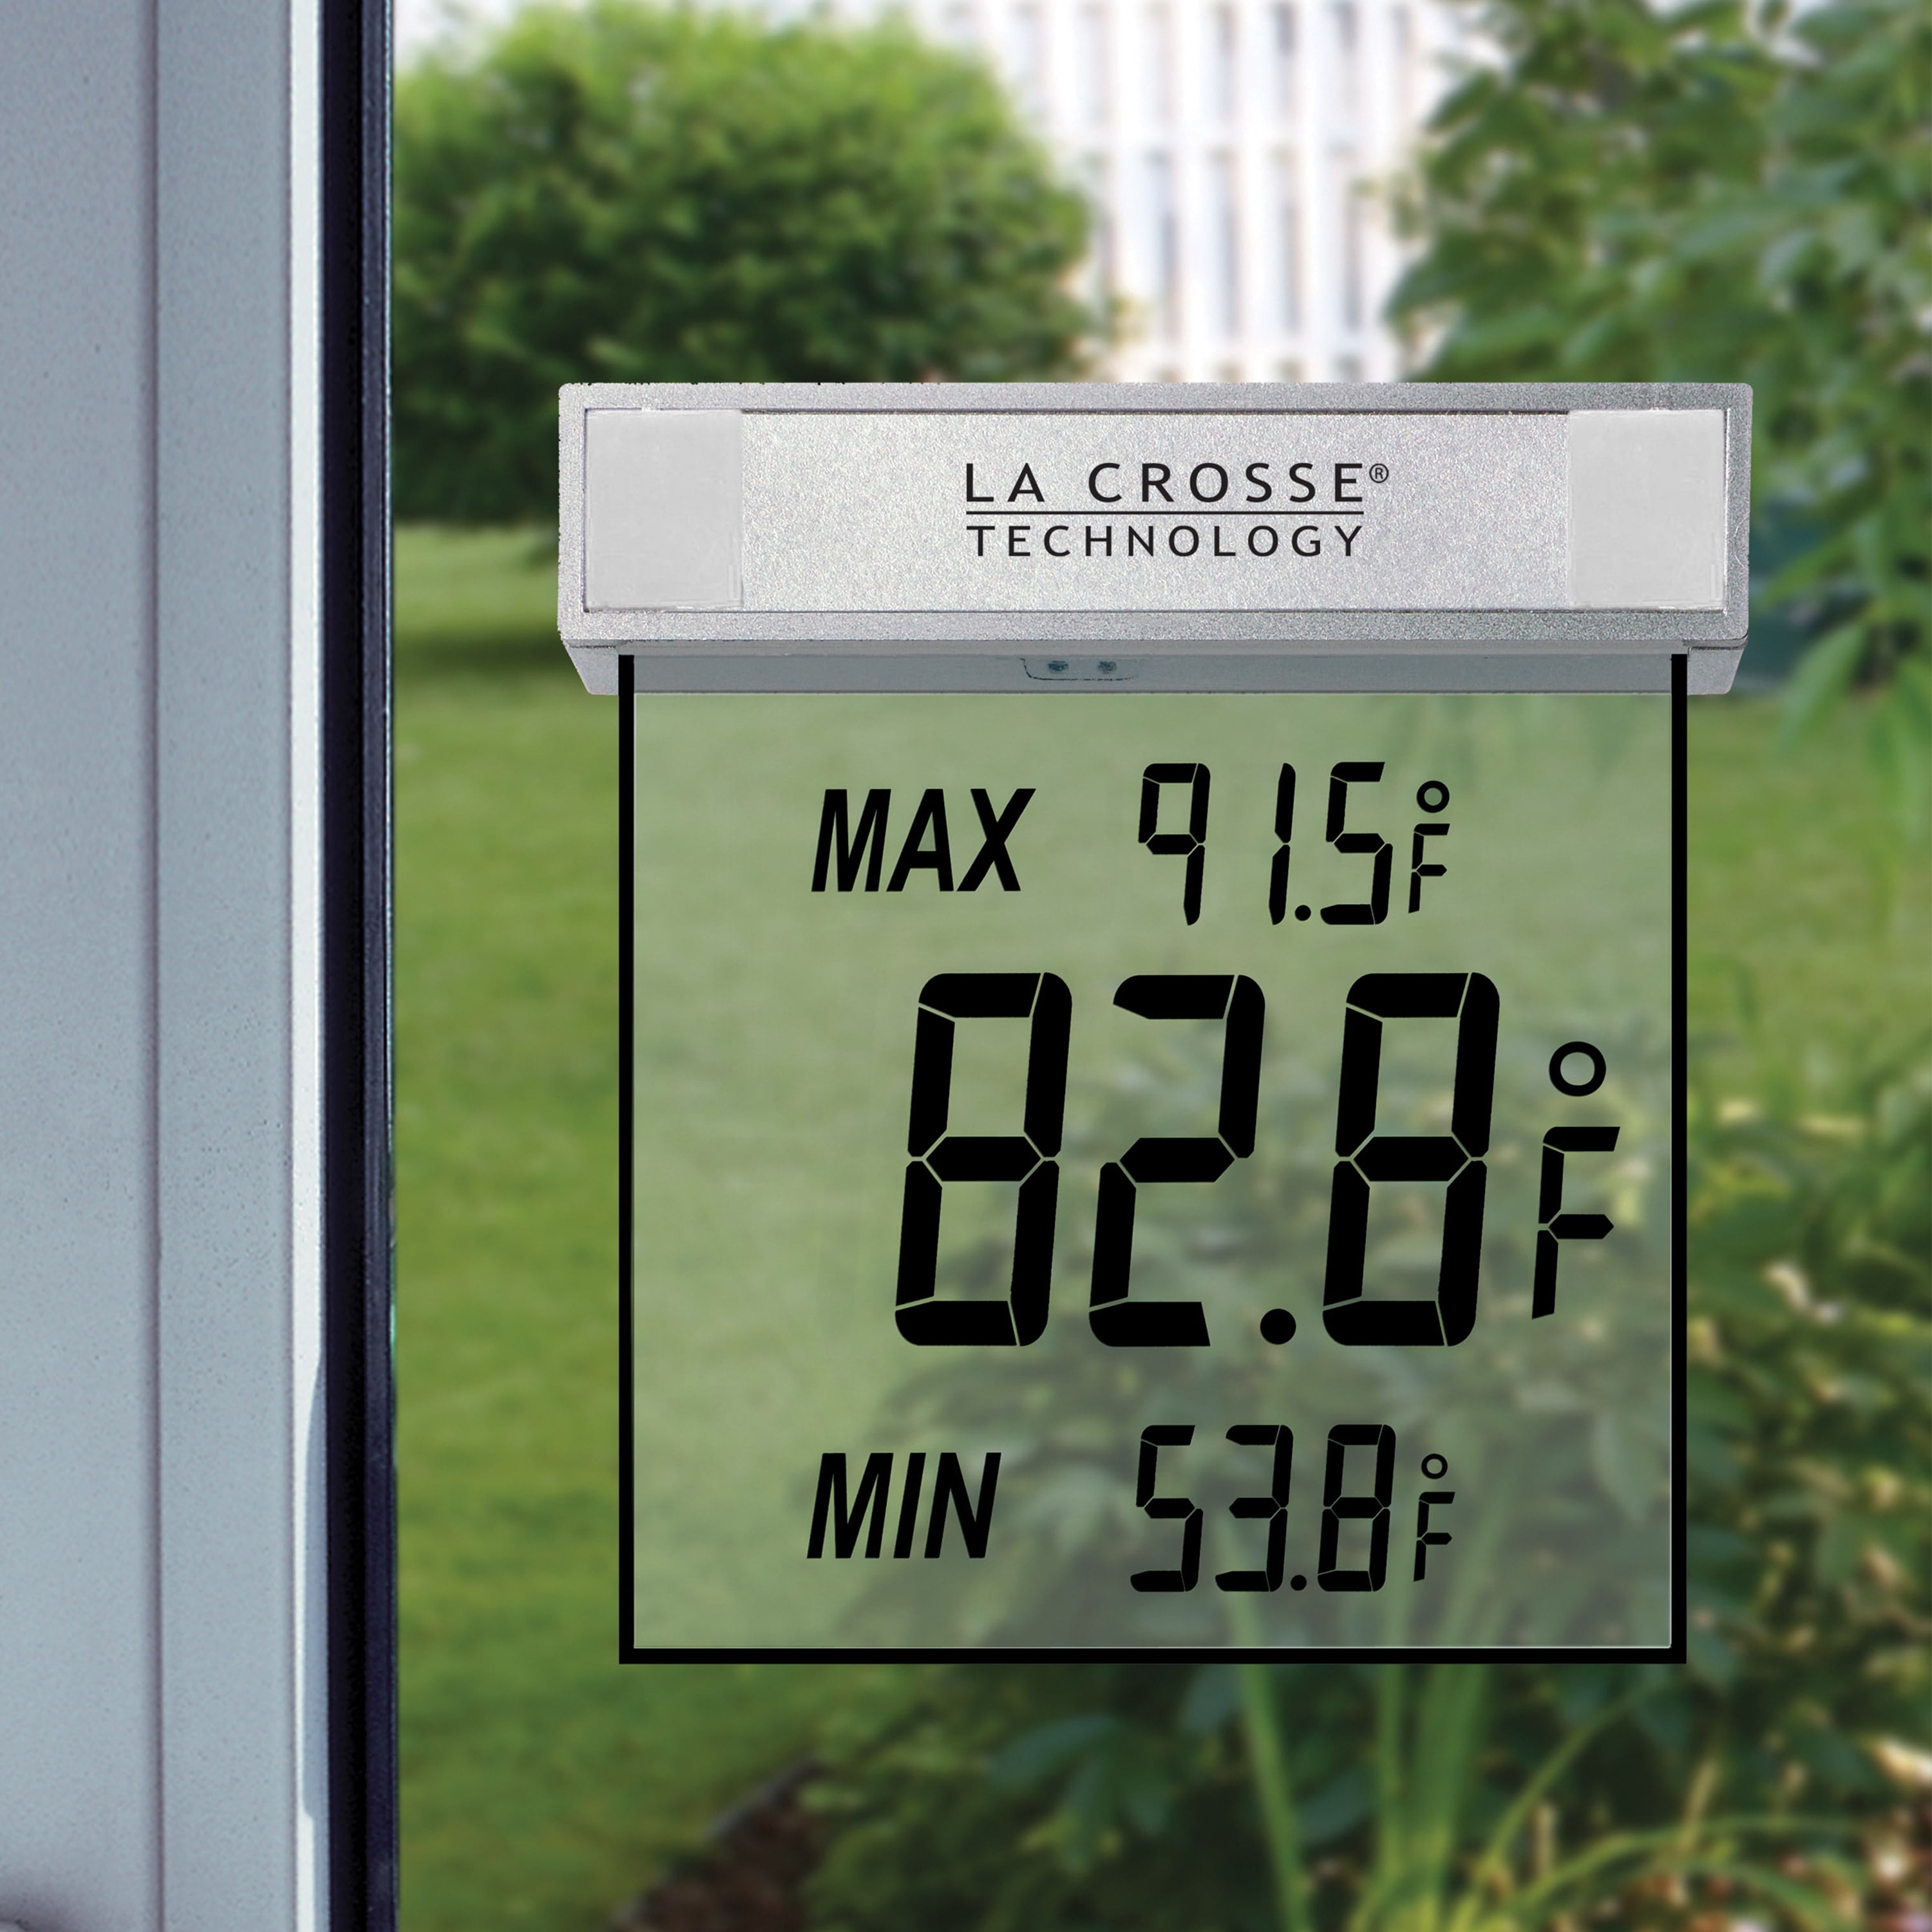 TFA Digital In-Outdoor Thermometer